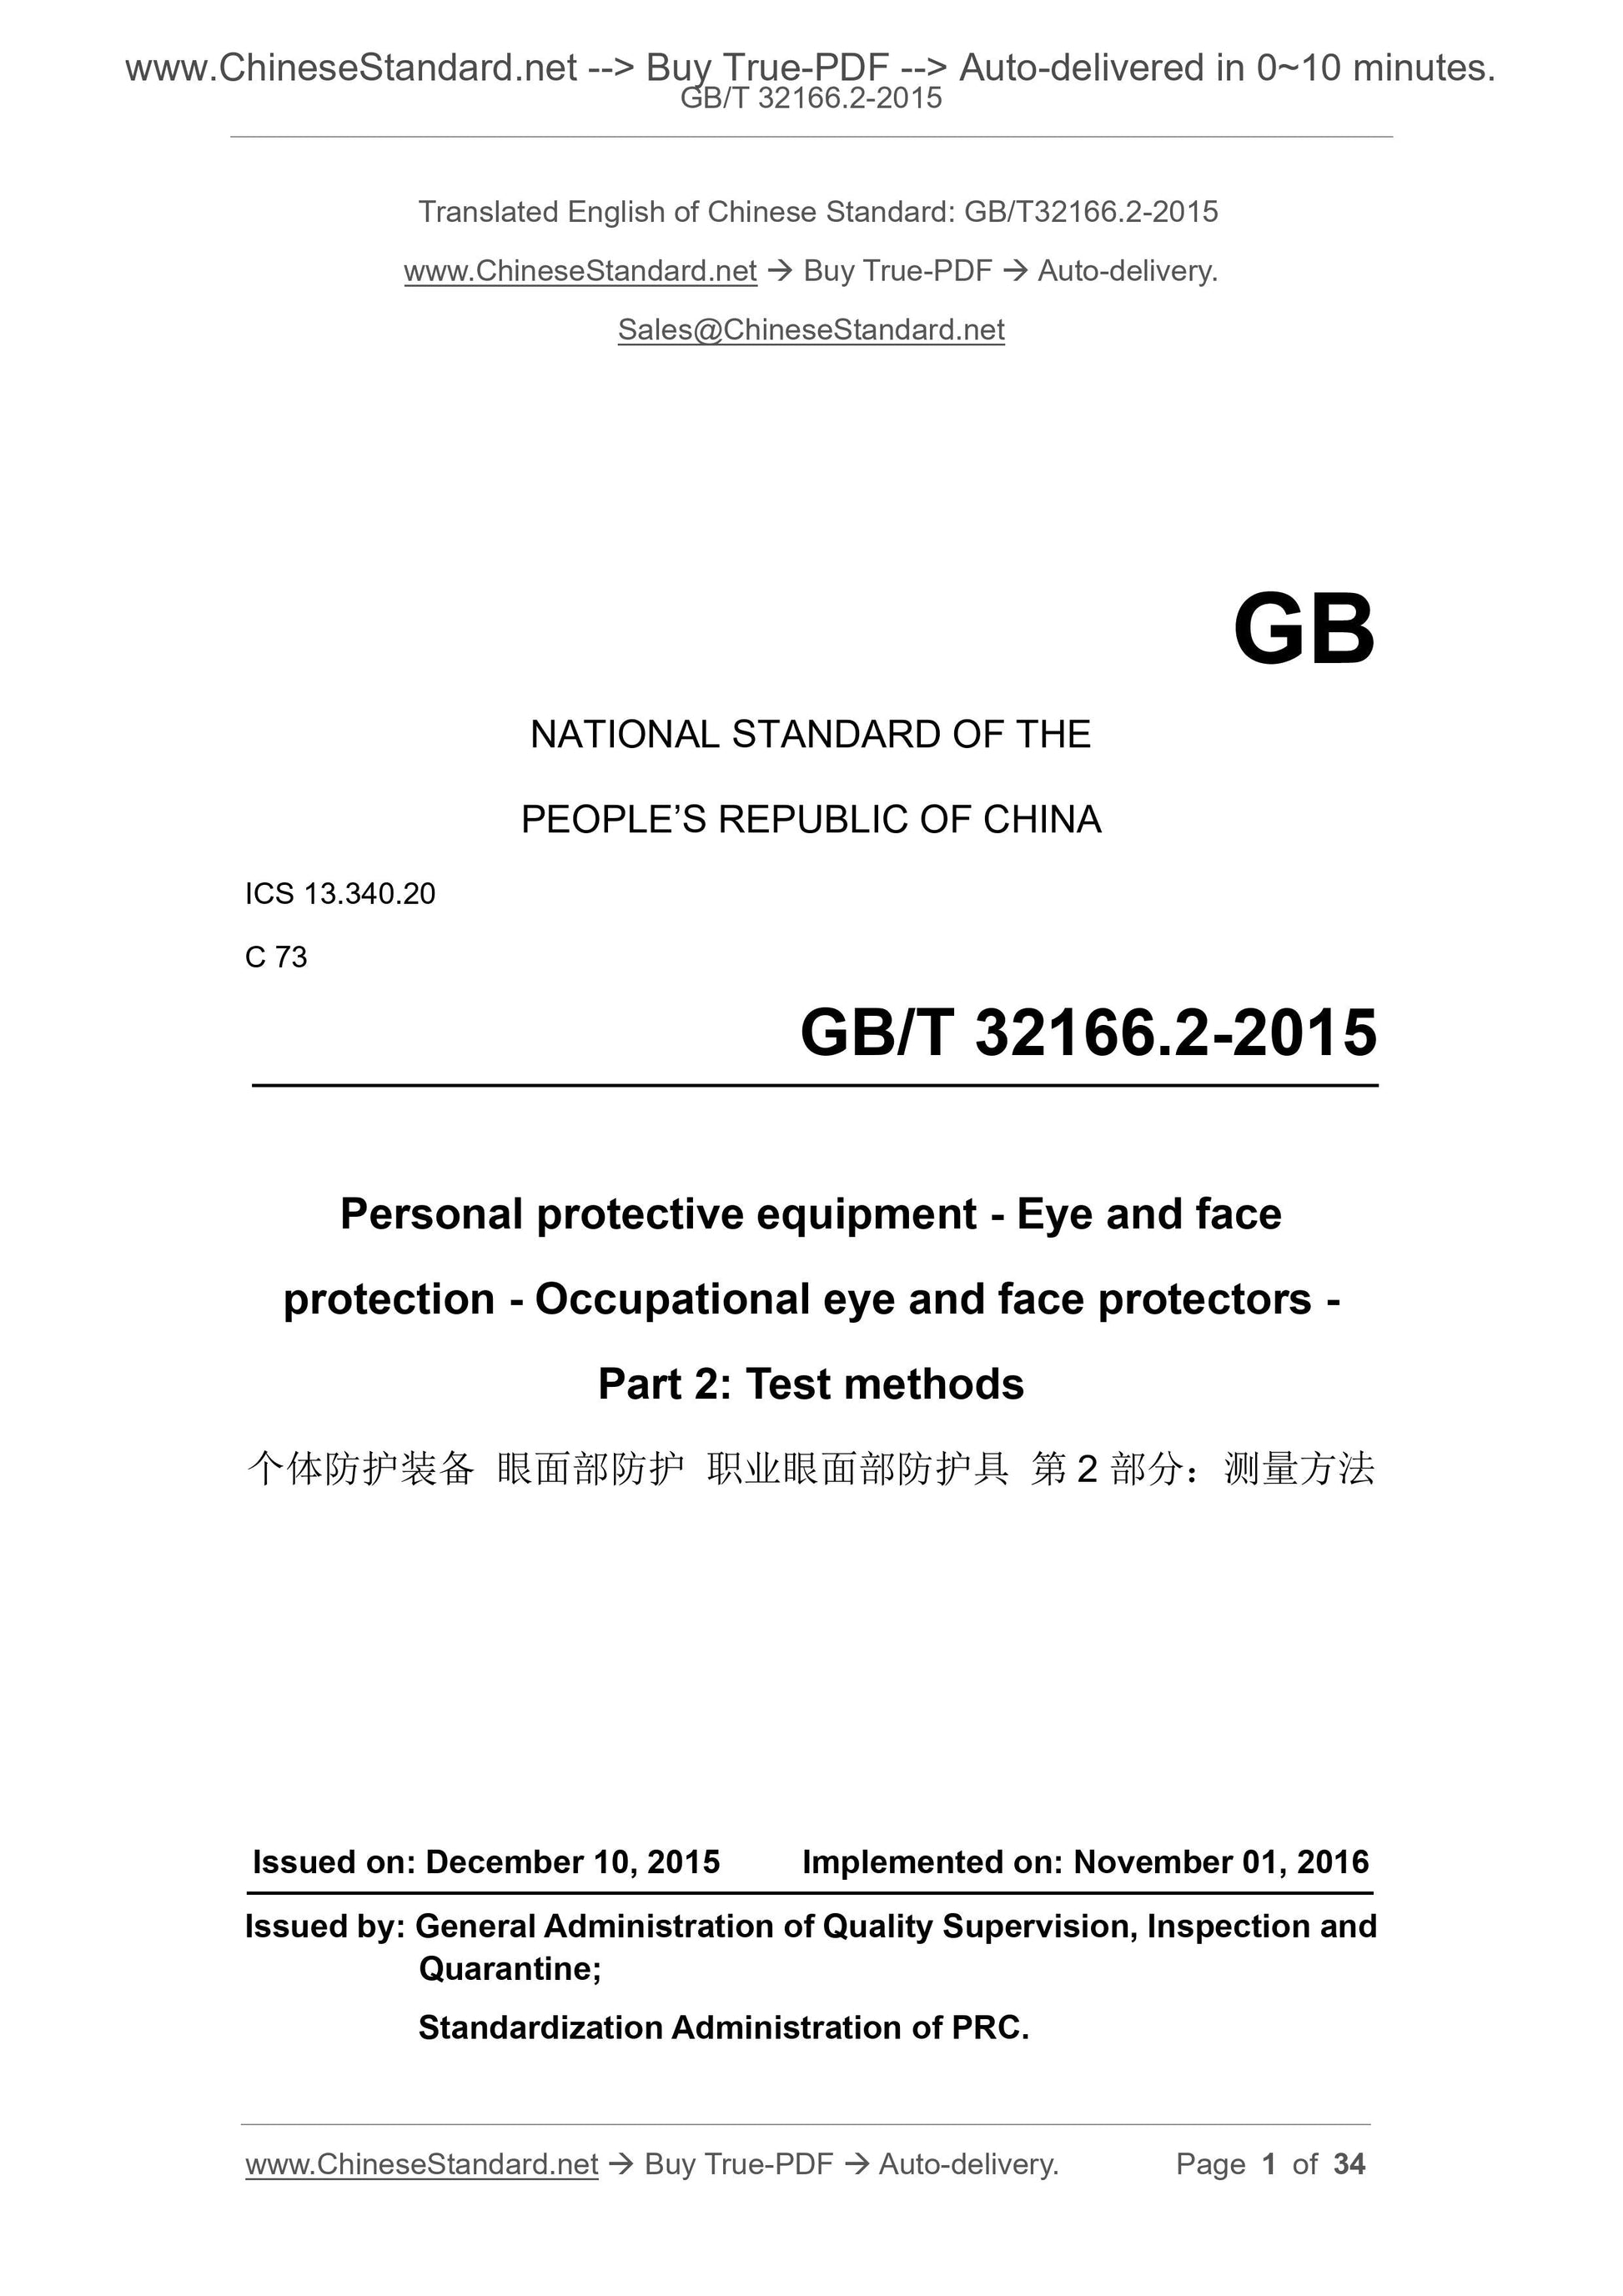 GB/T 32166.2-2015 Page 1